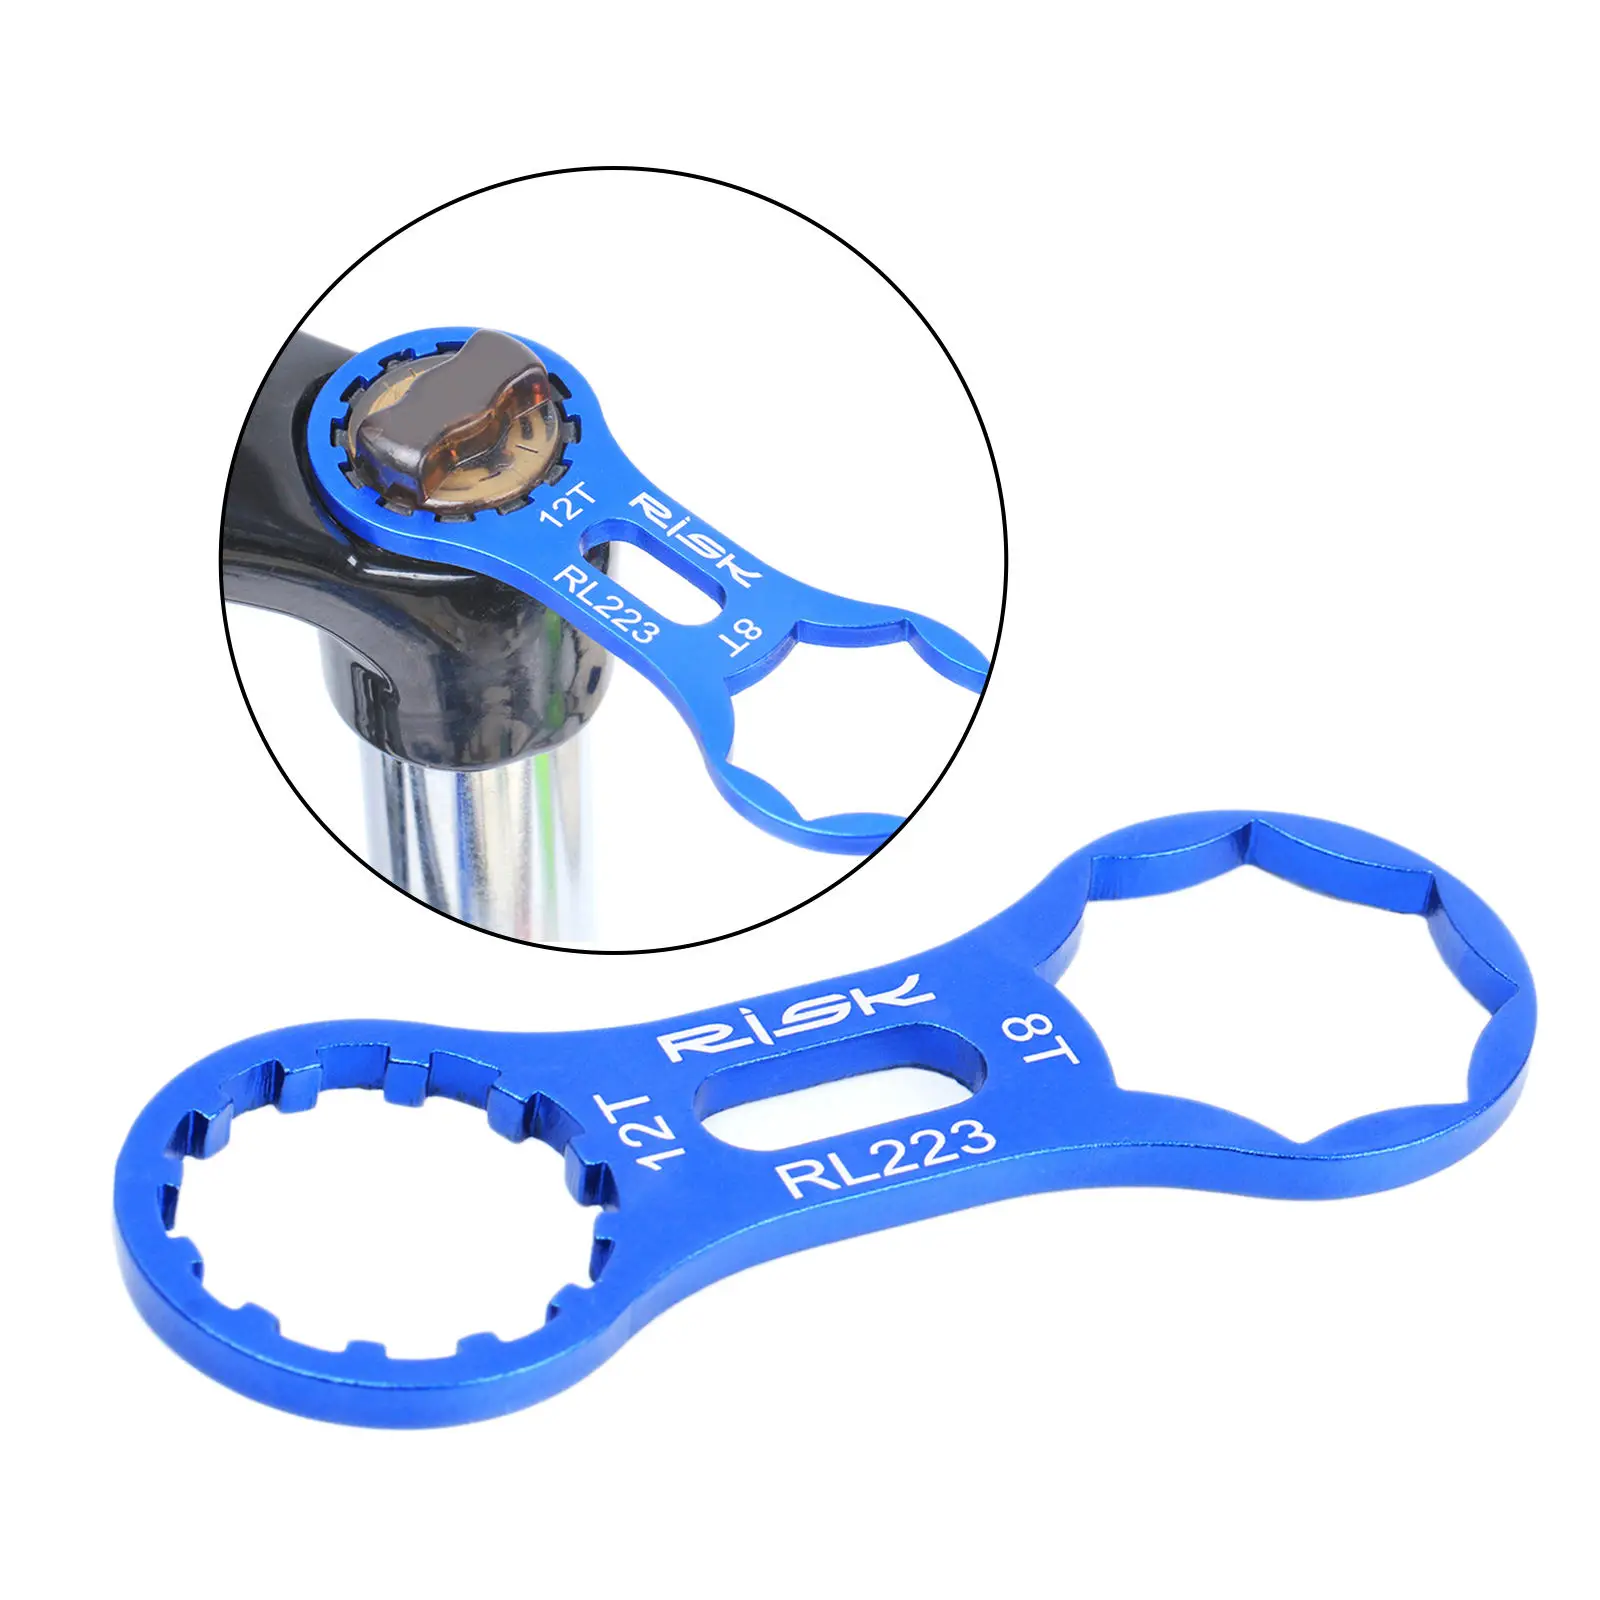 8T/12T Dirt Bike Remover Repair Tool MTB Bike Fork  Wrench For XCR/XCT/XCM/RST Front Fork, Cycling Bicycle Fork  Spanner